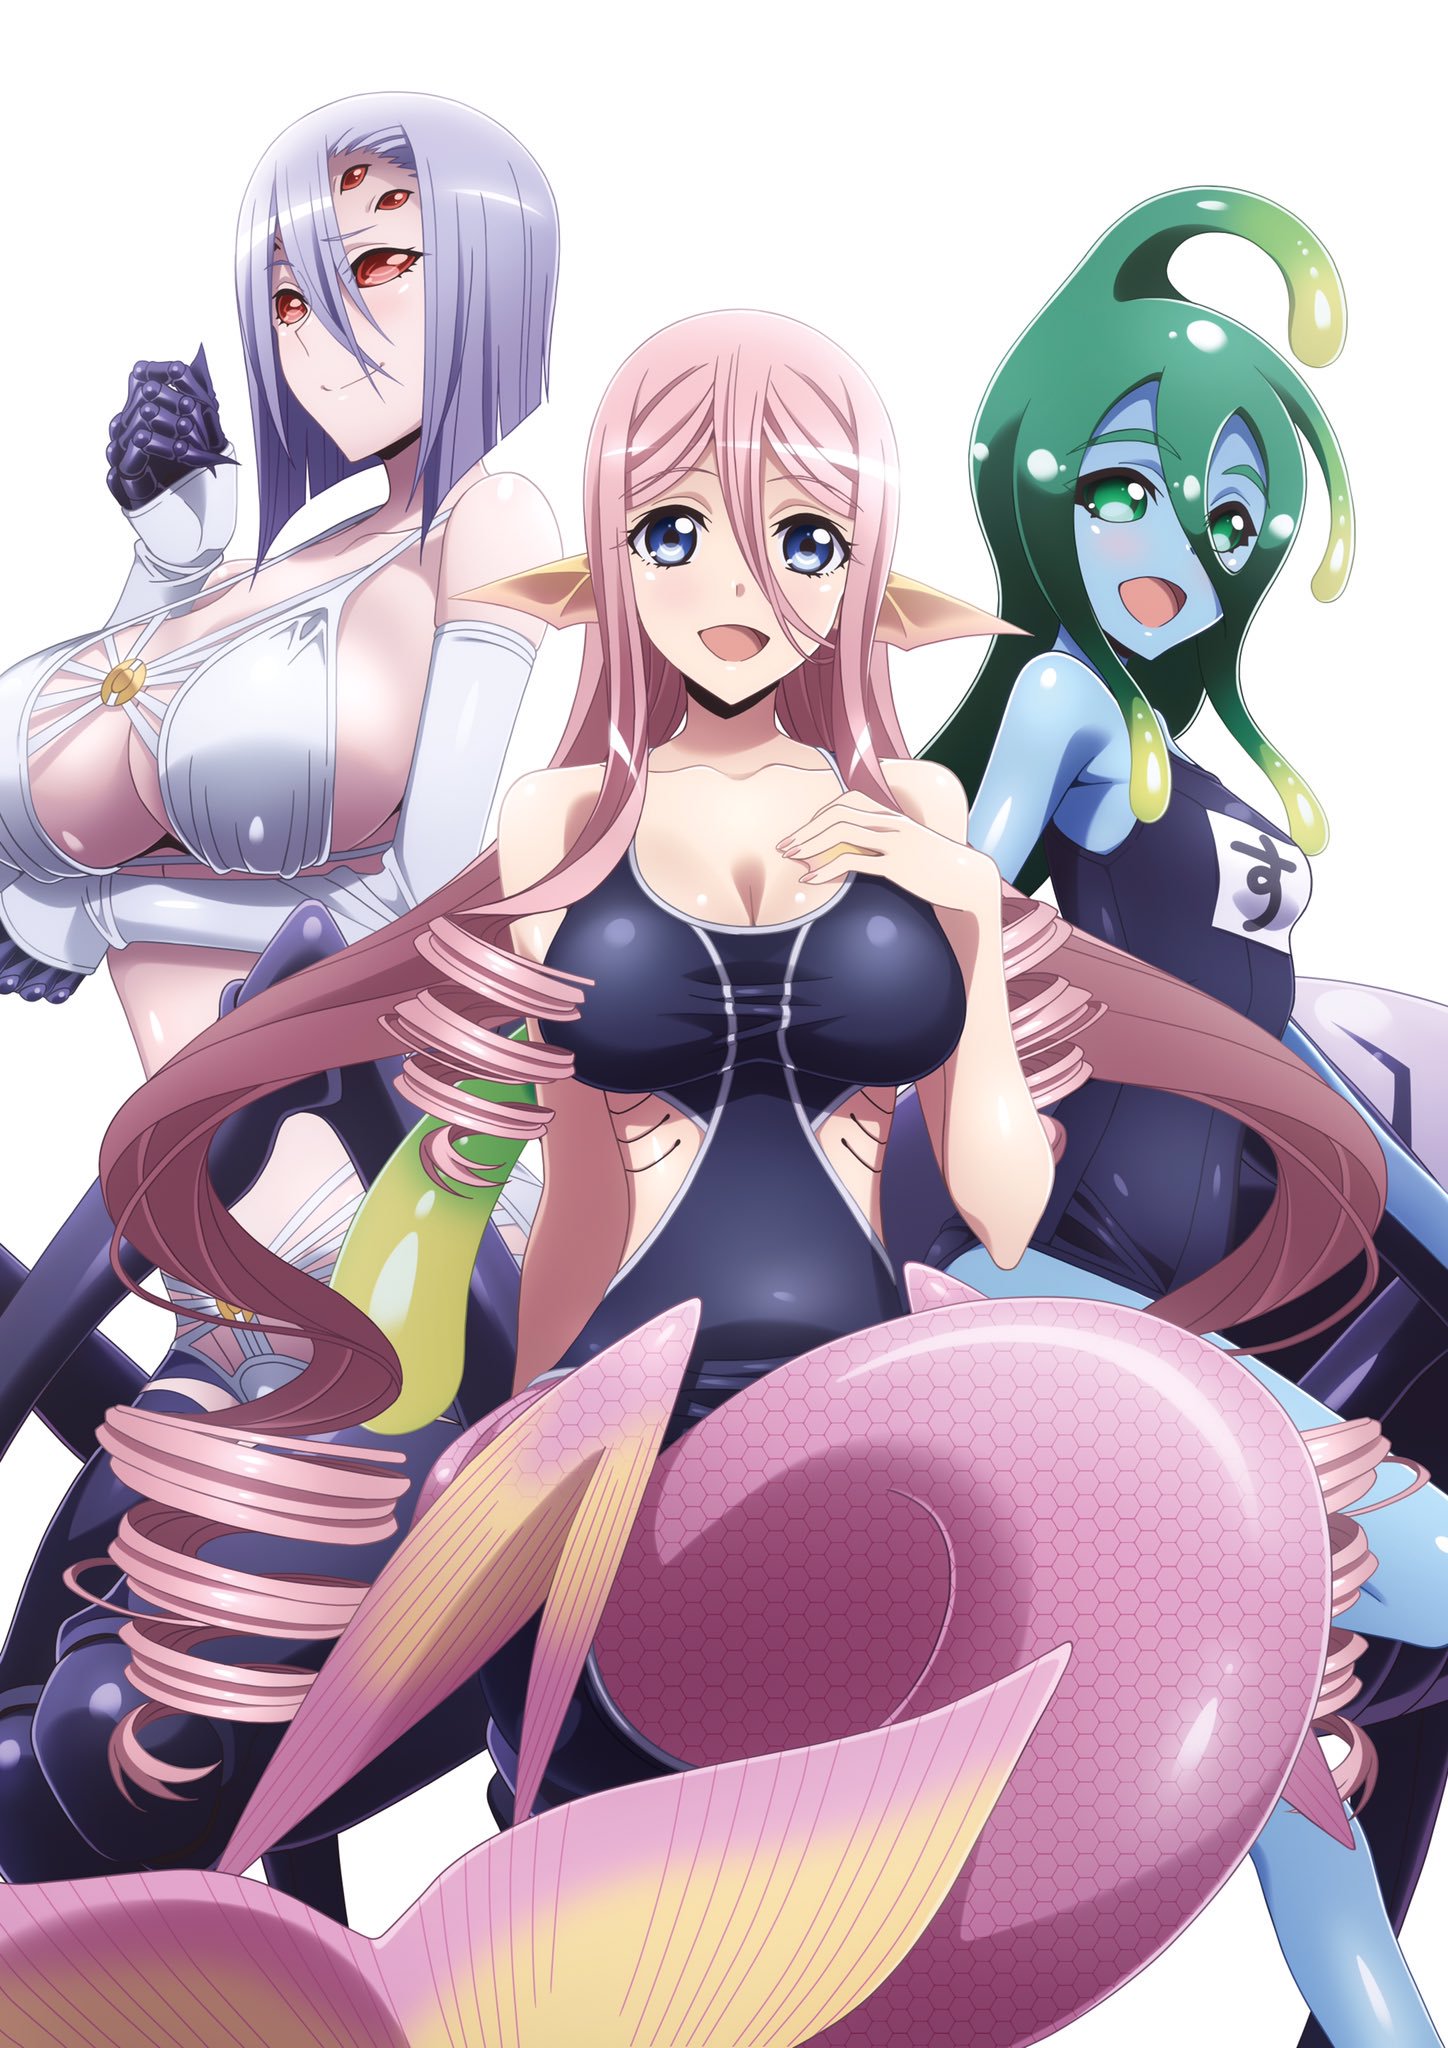 desmond craig recommends Monster Musume Sexy